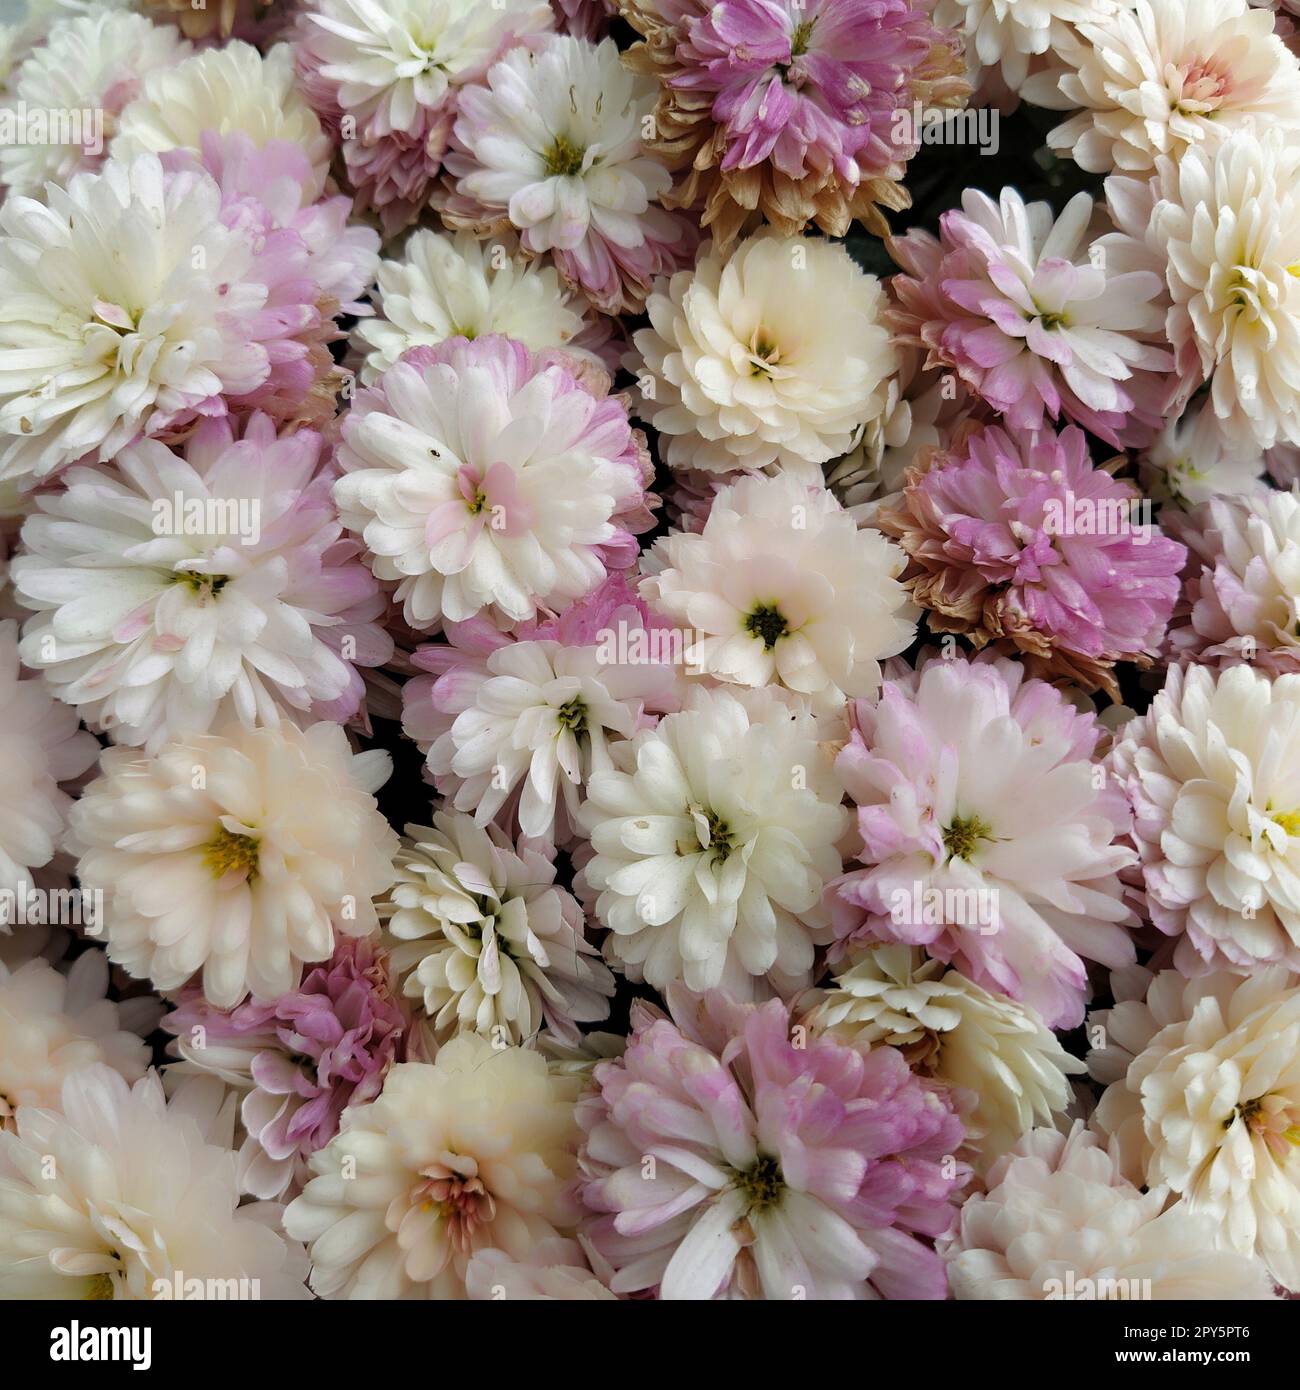 Flowers wall background with amazing white, pink, purple and yellow chrysanthemum flowers. Wedding decoration.  Beautiful flower bad wall background. Landscape design of the autumn garden. Stock Photo